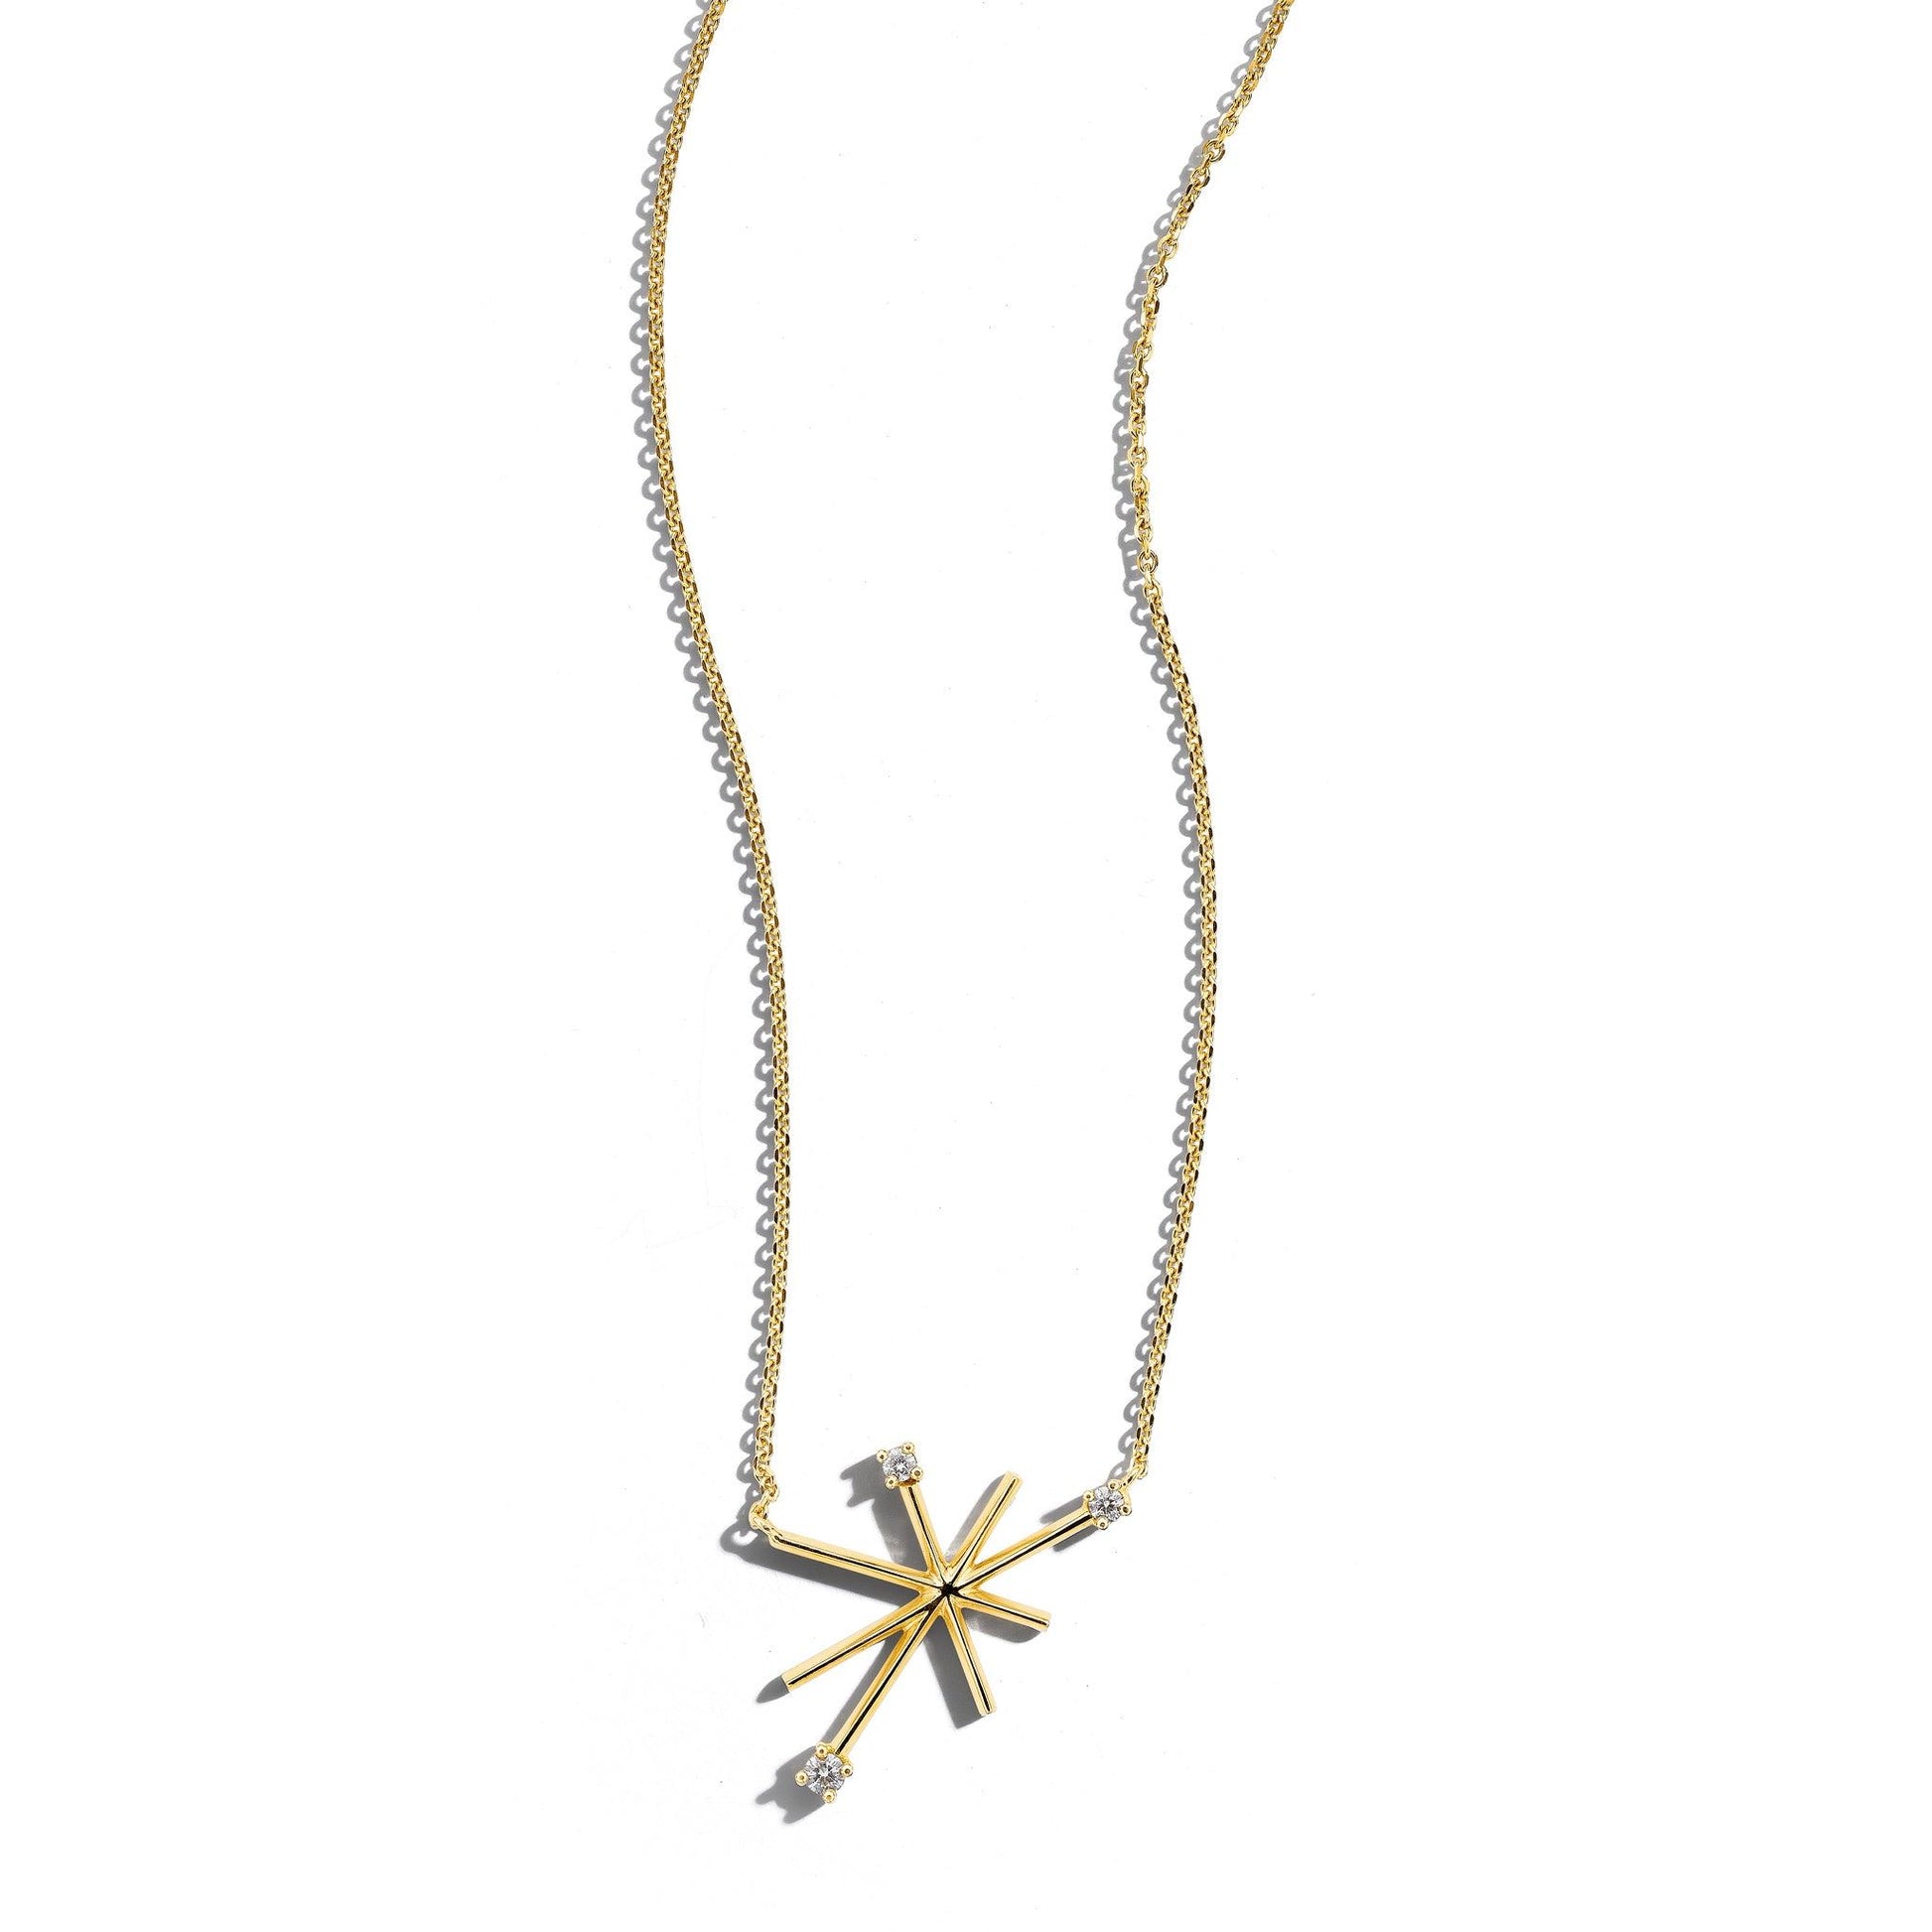 Mimi-So-Piece-Star-Necklace-Small_18k Yellow Gold